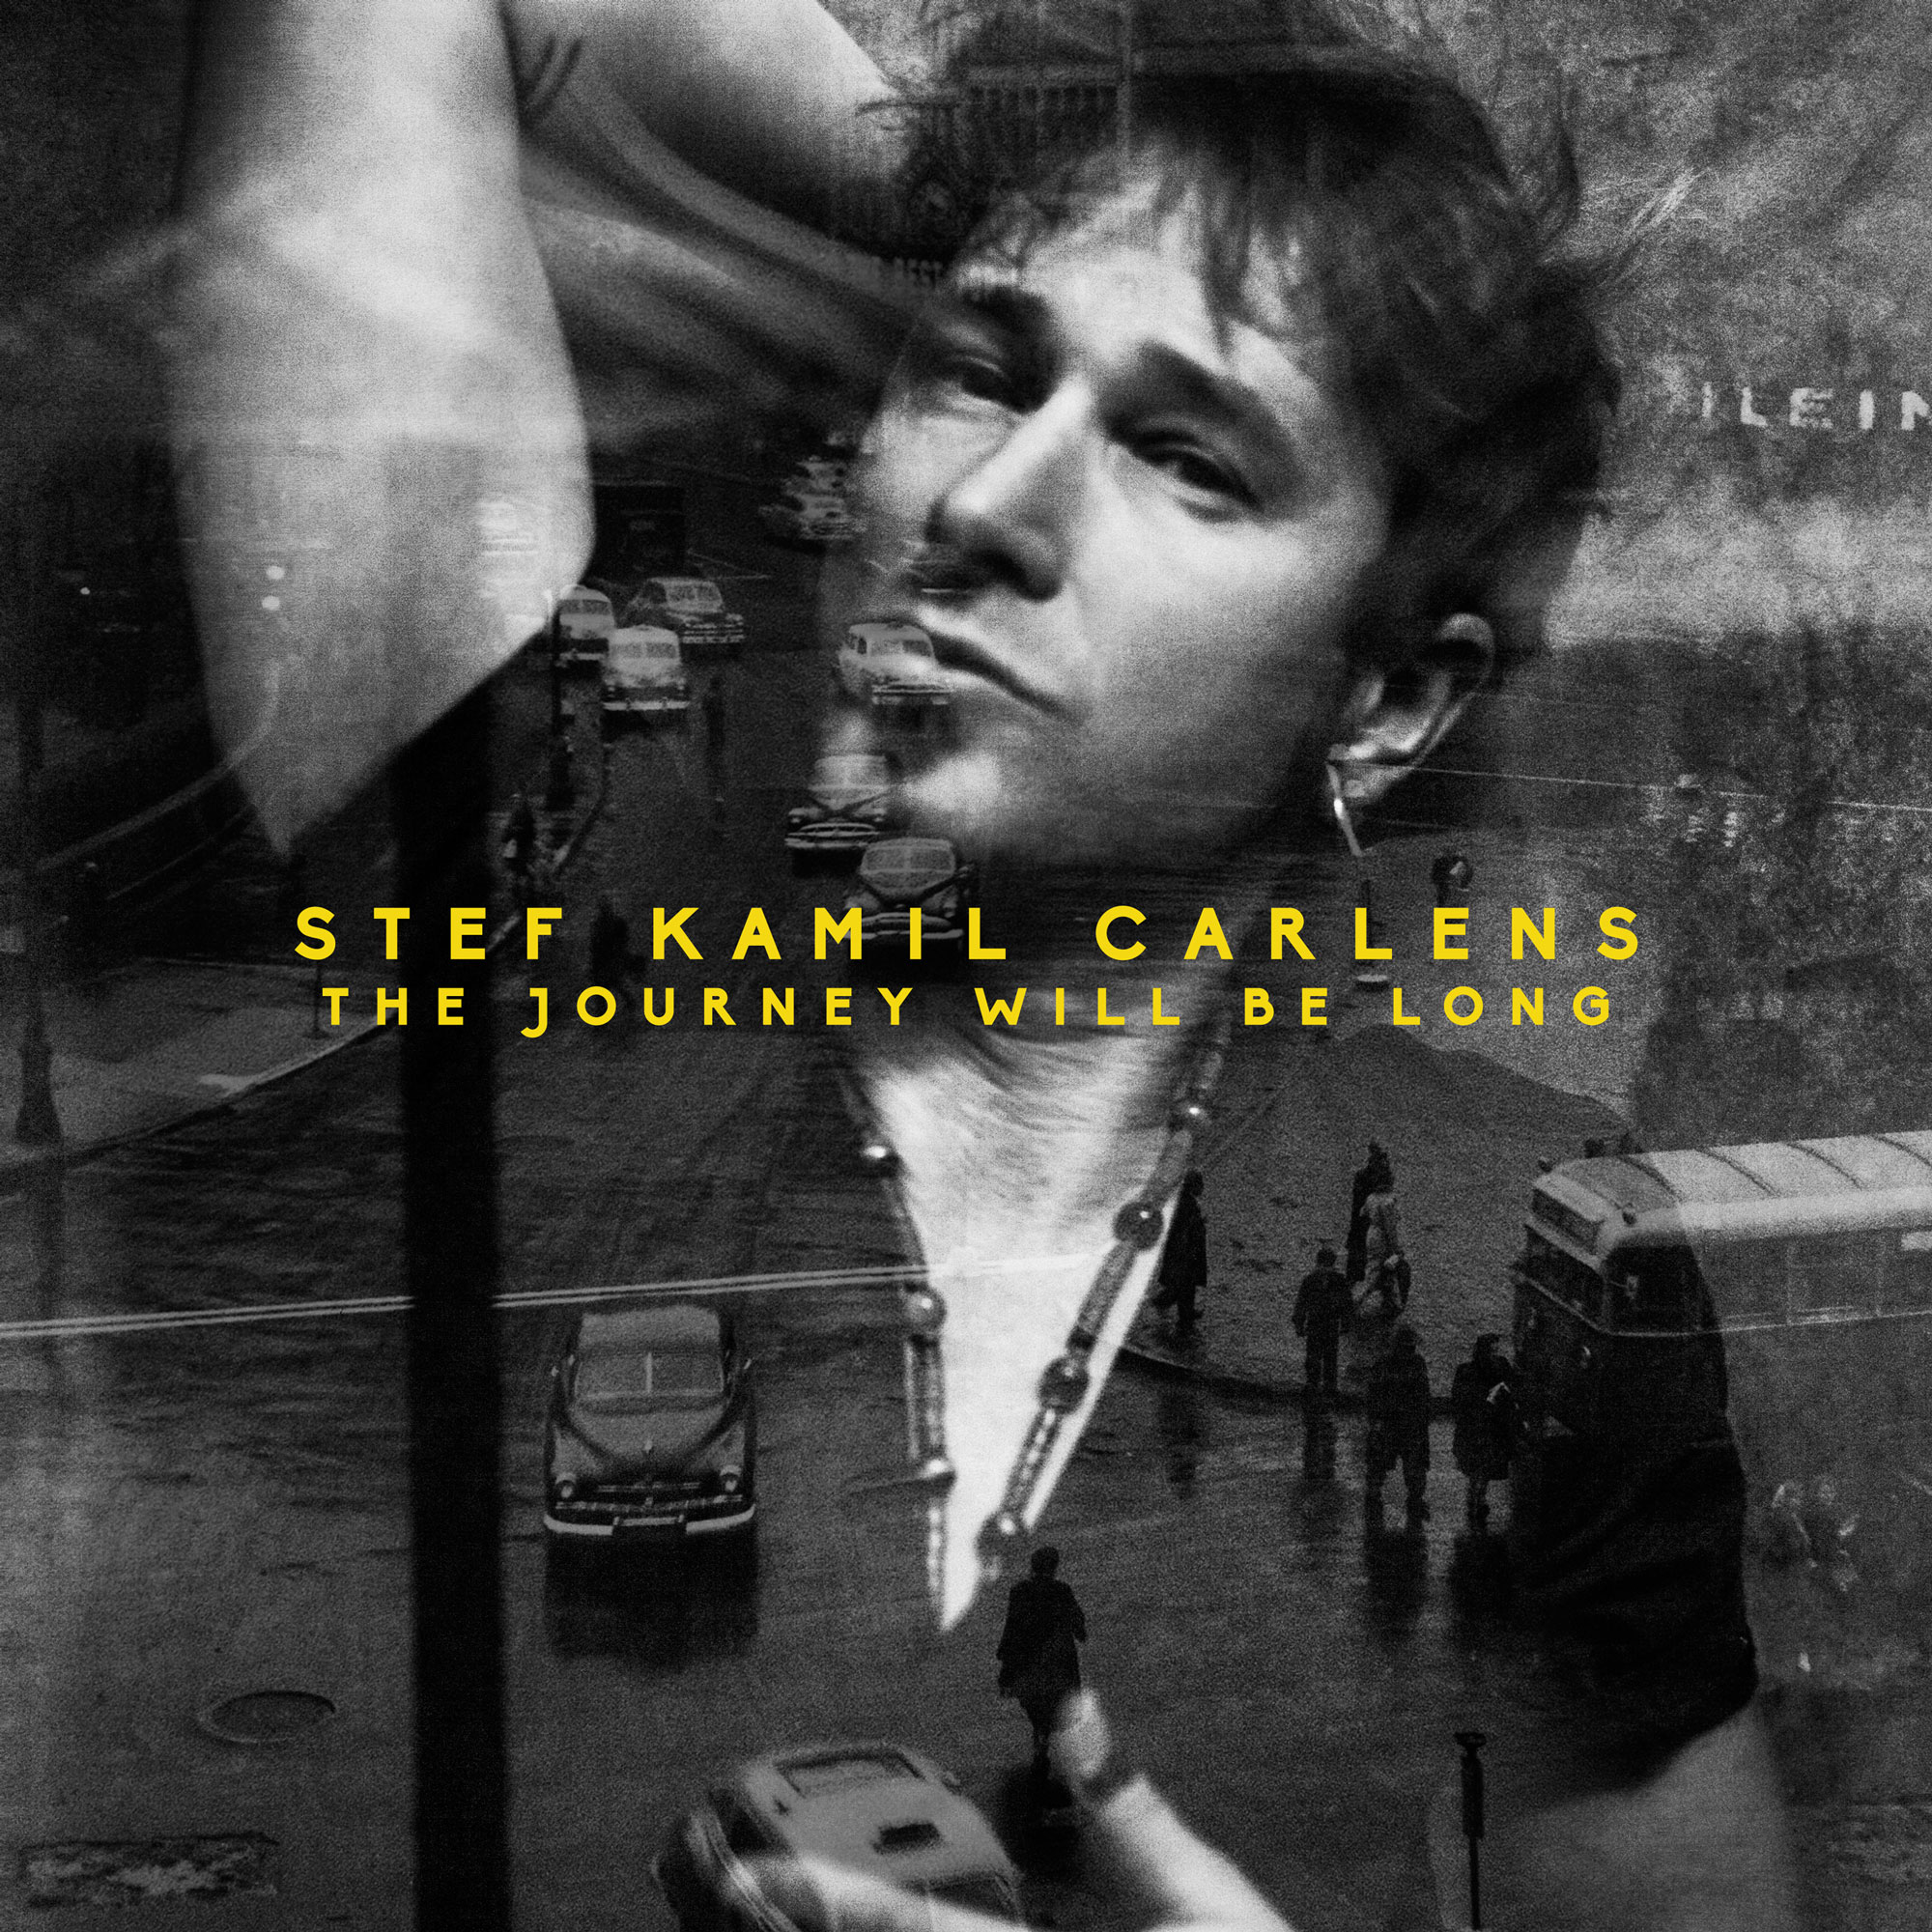 The Journey Will Be Long, Stef Kamil Carlens, Stef Kamil, new album, new single, musician, youtube, videoclip, zita swoon, deus